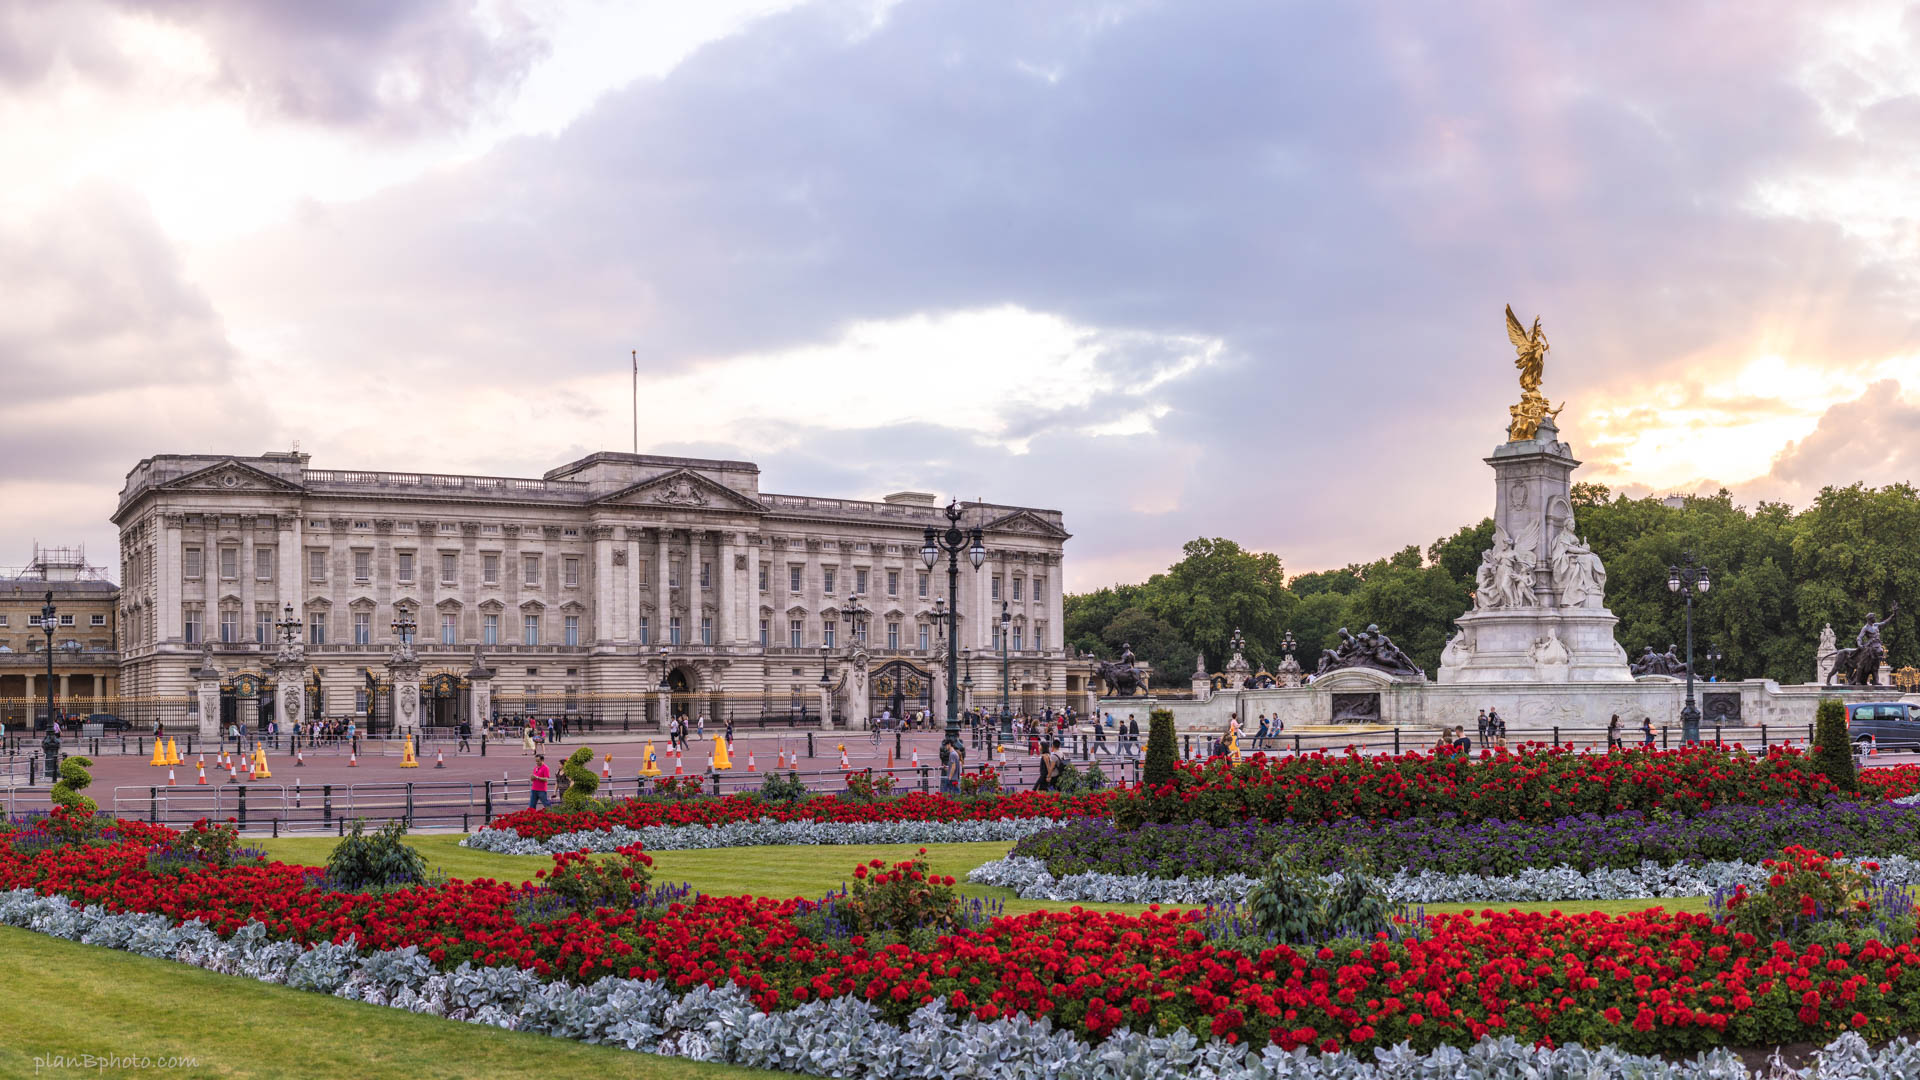 Sunset at Buckingham palace with flowers in sommer